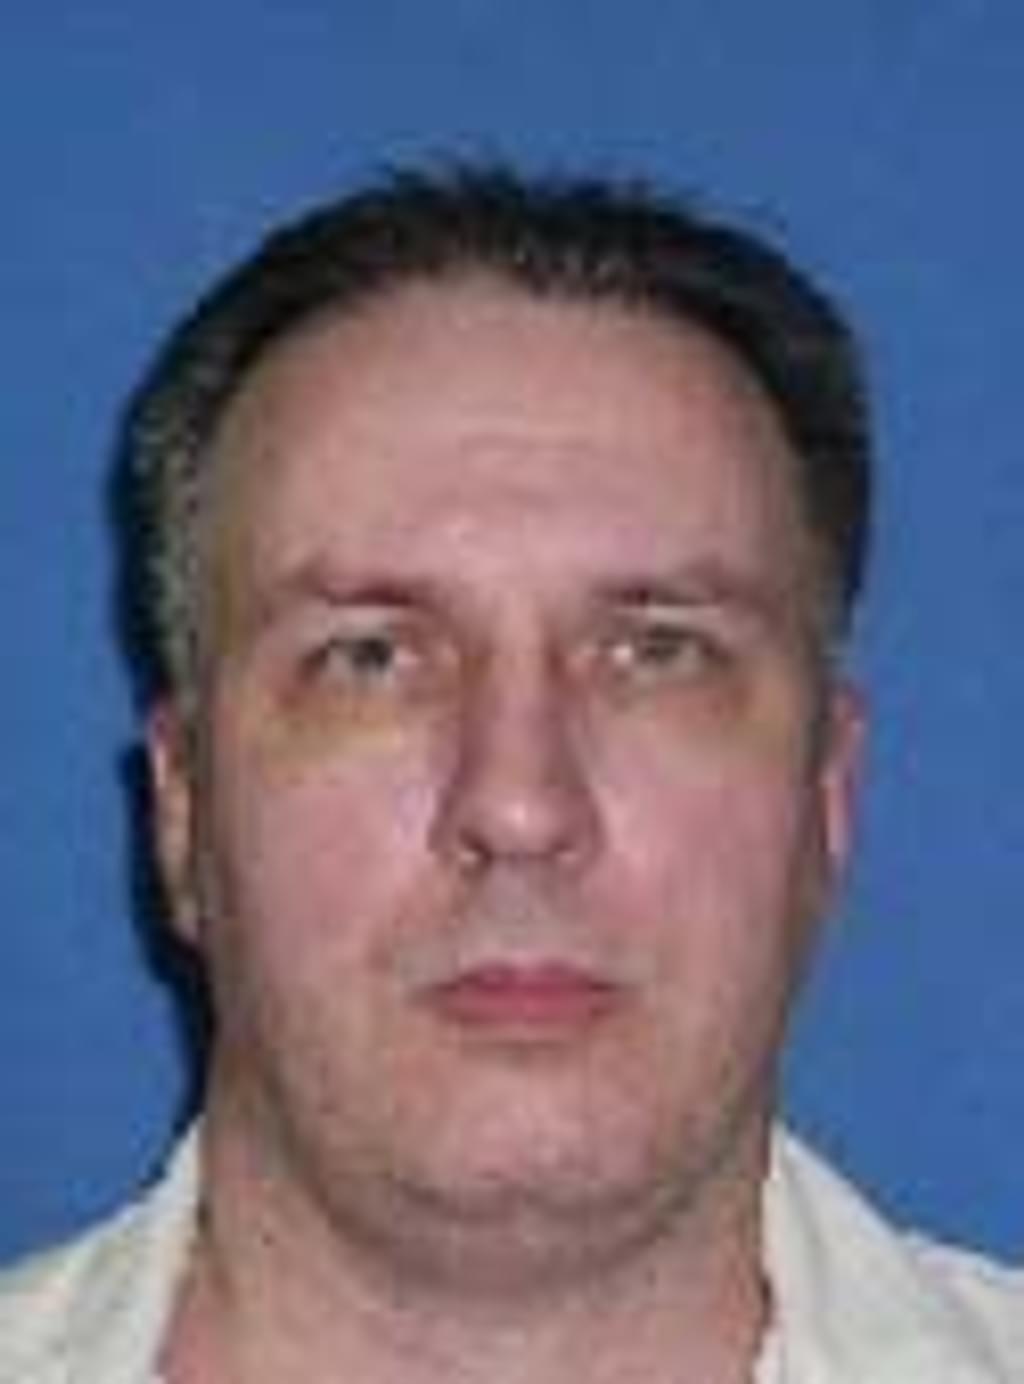 Texas Prisoner Receives Second Stay of Execution Over Religious Discrimination Issue